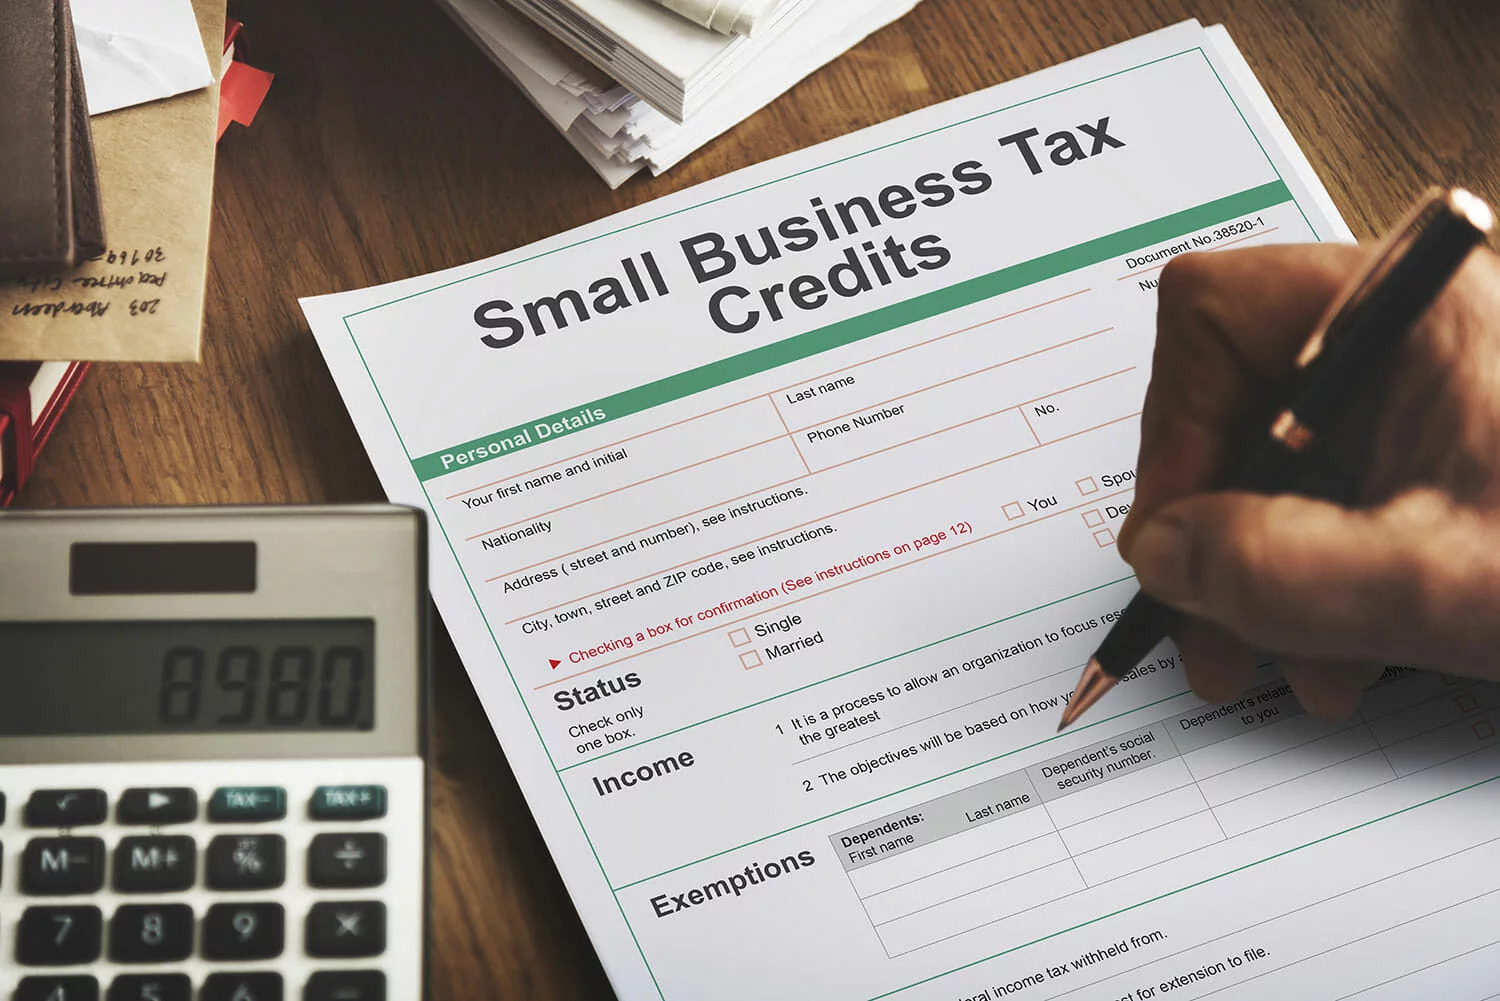 Tax Credits for Small Businesses: Check here if you're eligible! (Photo: iStock)